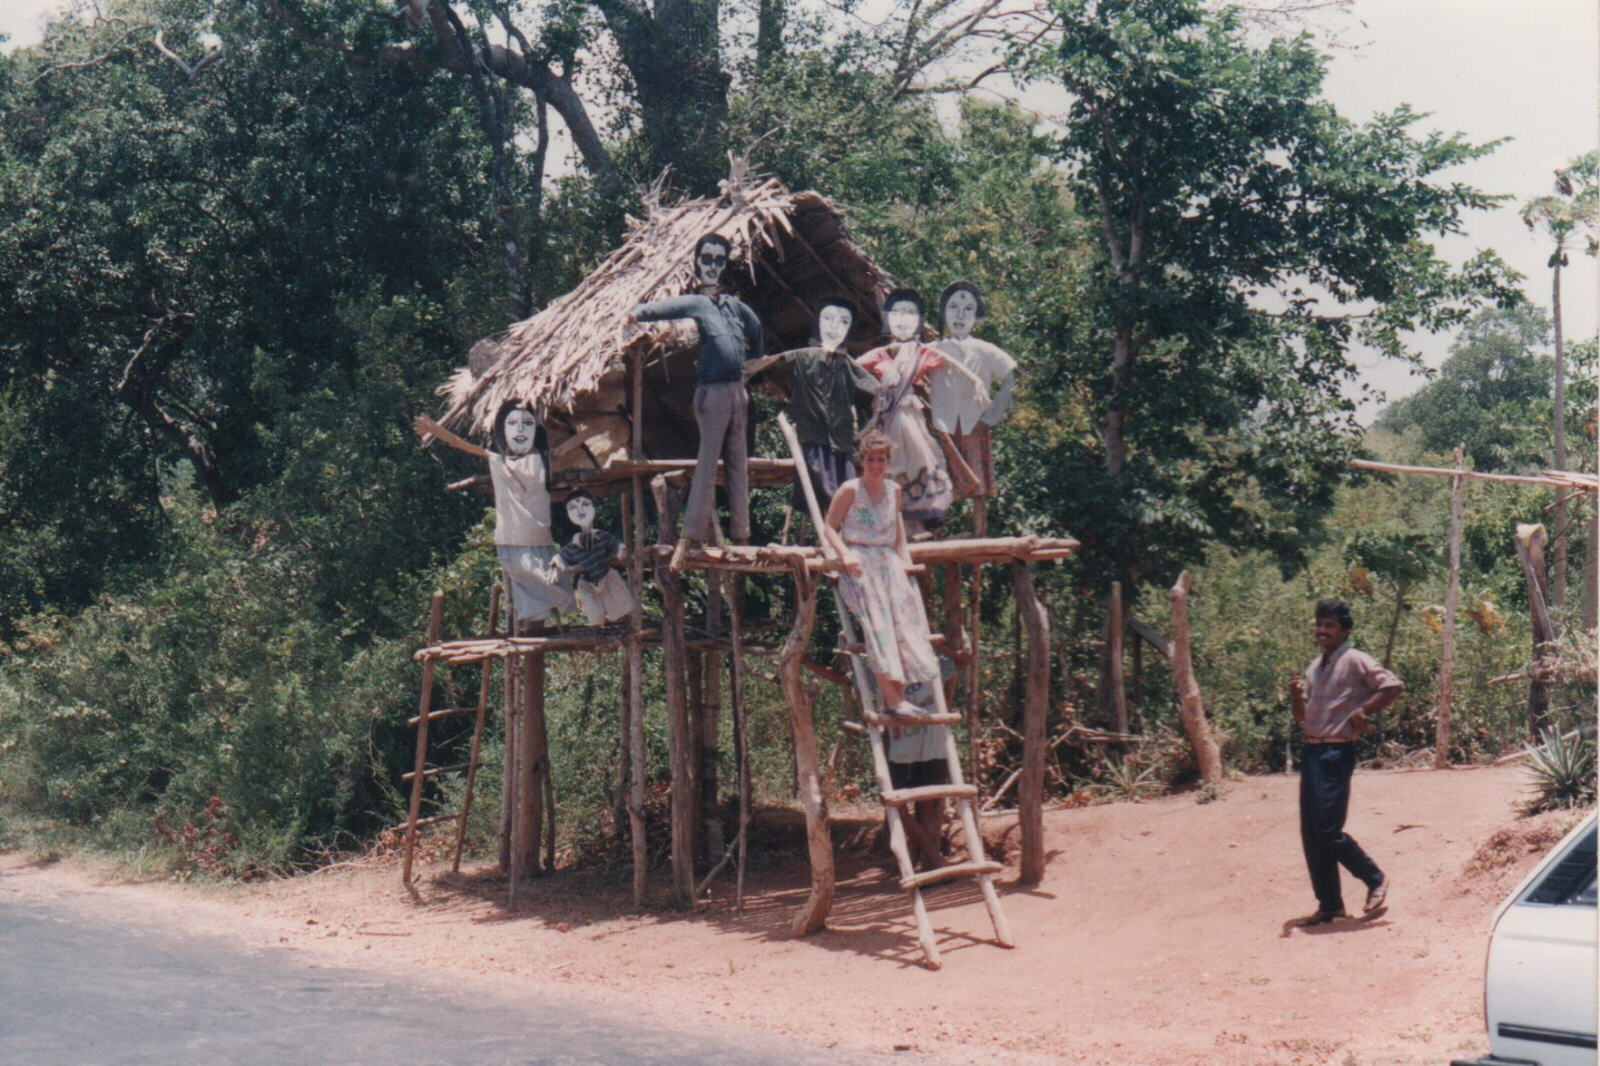 A 'poor person's house' in a village, Sri Lanka